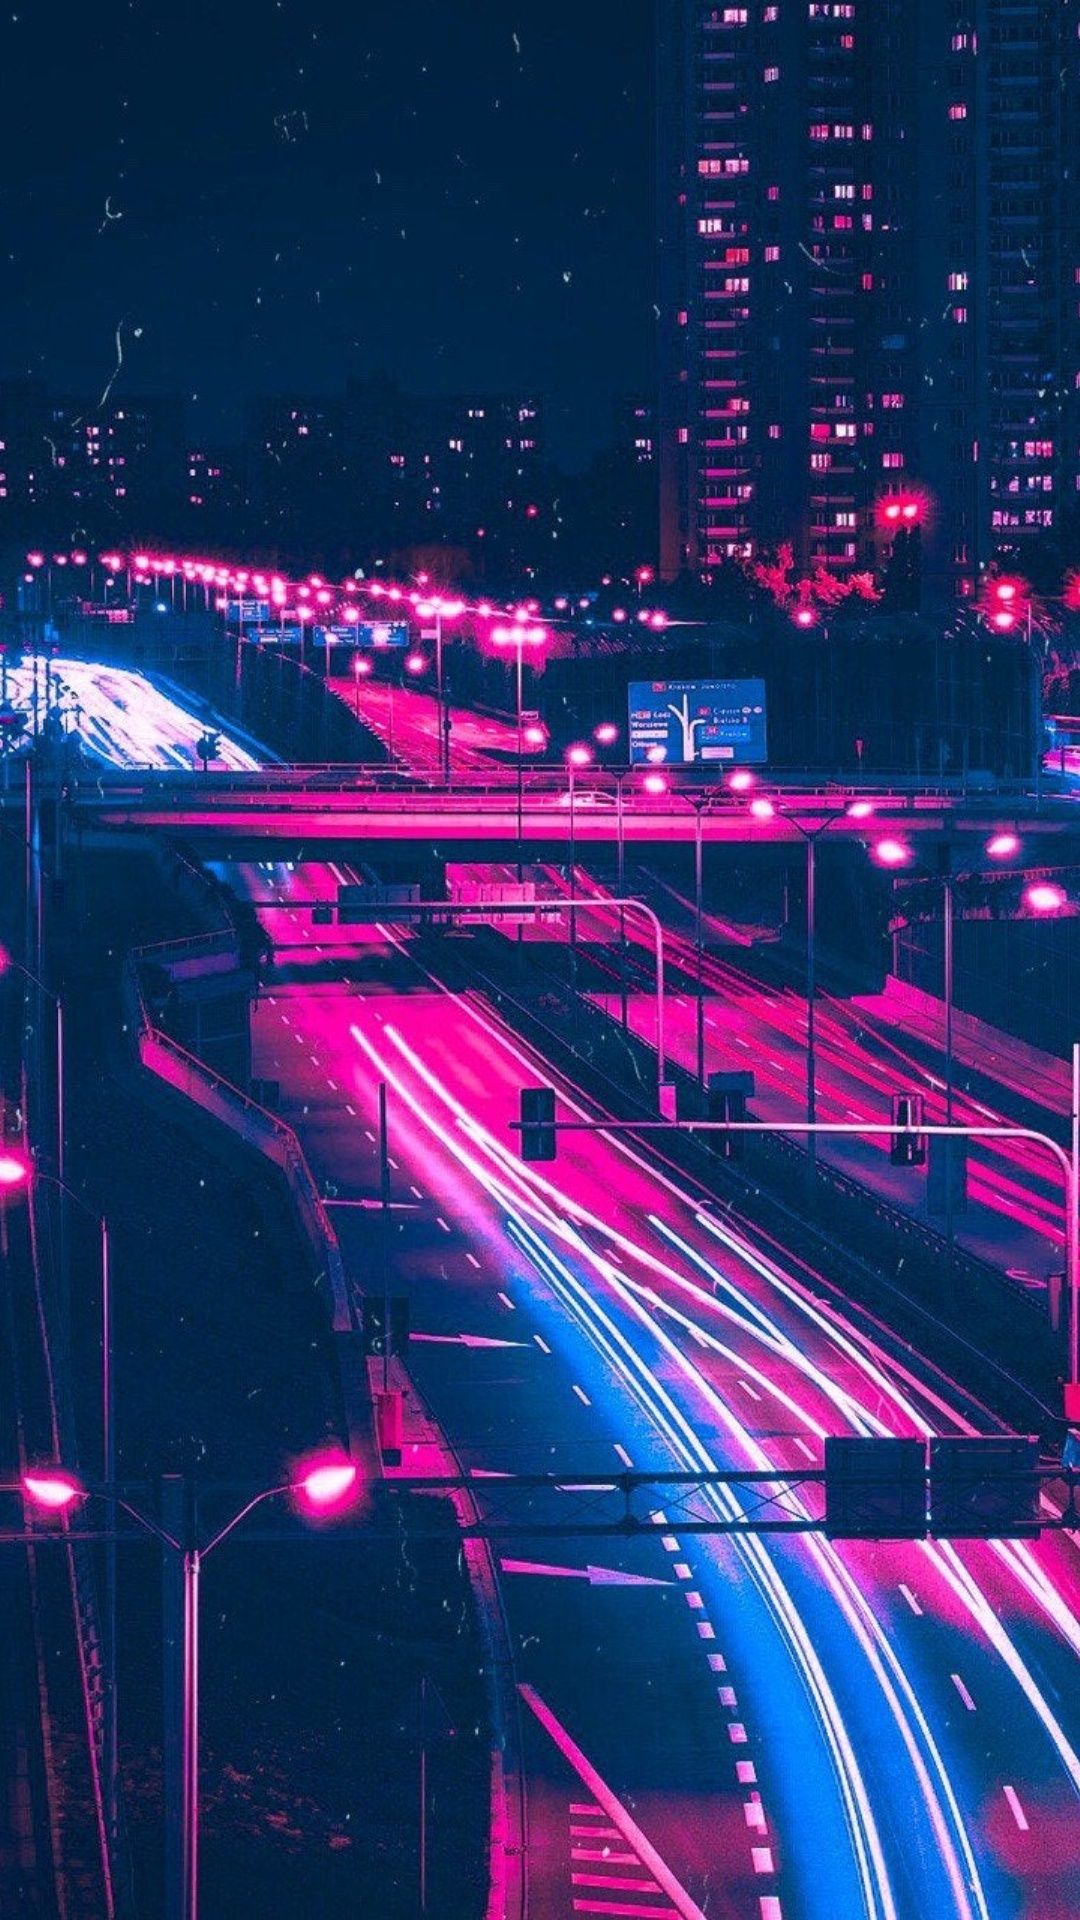 Aesthetic City Night Wallpaper for Phones with high-resolution 1080x1920 pixel. You can use this wallpaper for your iPhone 5, 6, 7, 8, X, XS, XR backgrounds, Mobile Screensaver, or iPad Lock Screen - Neon blue, city